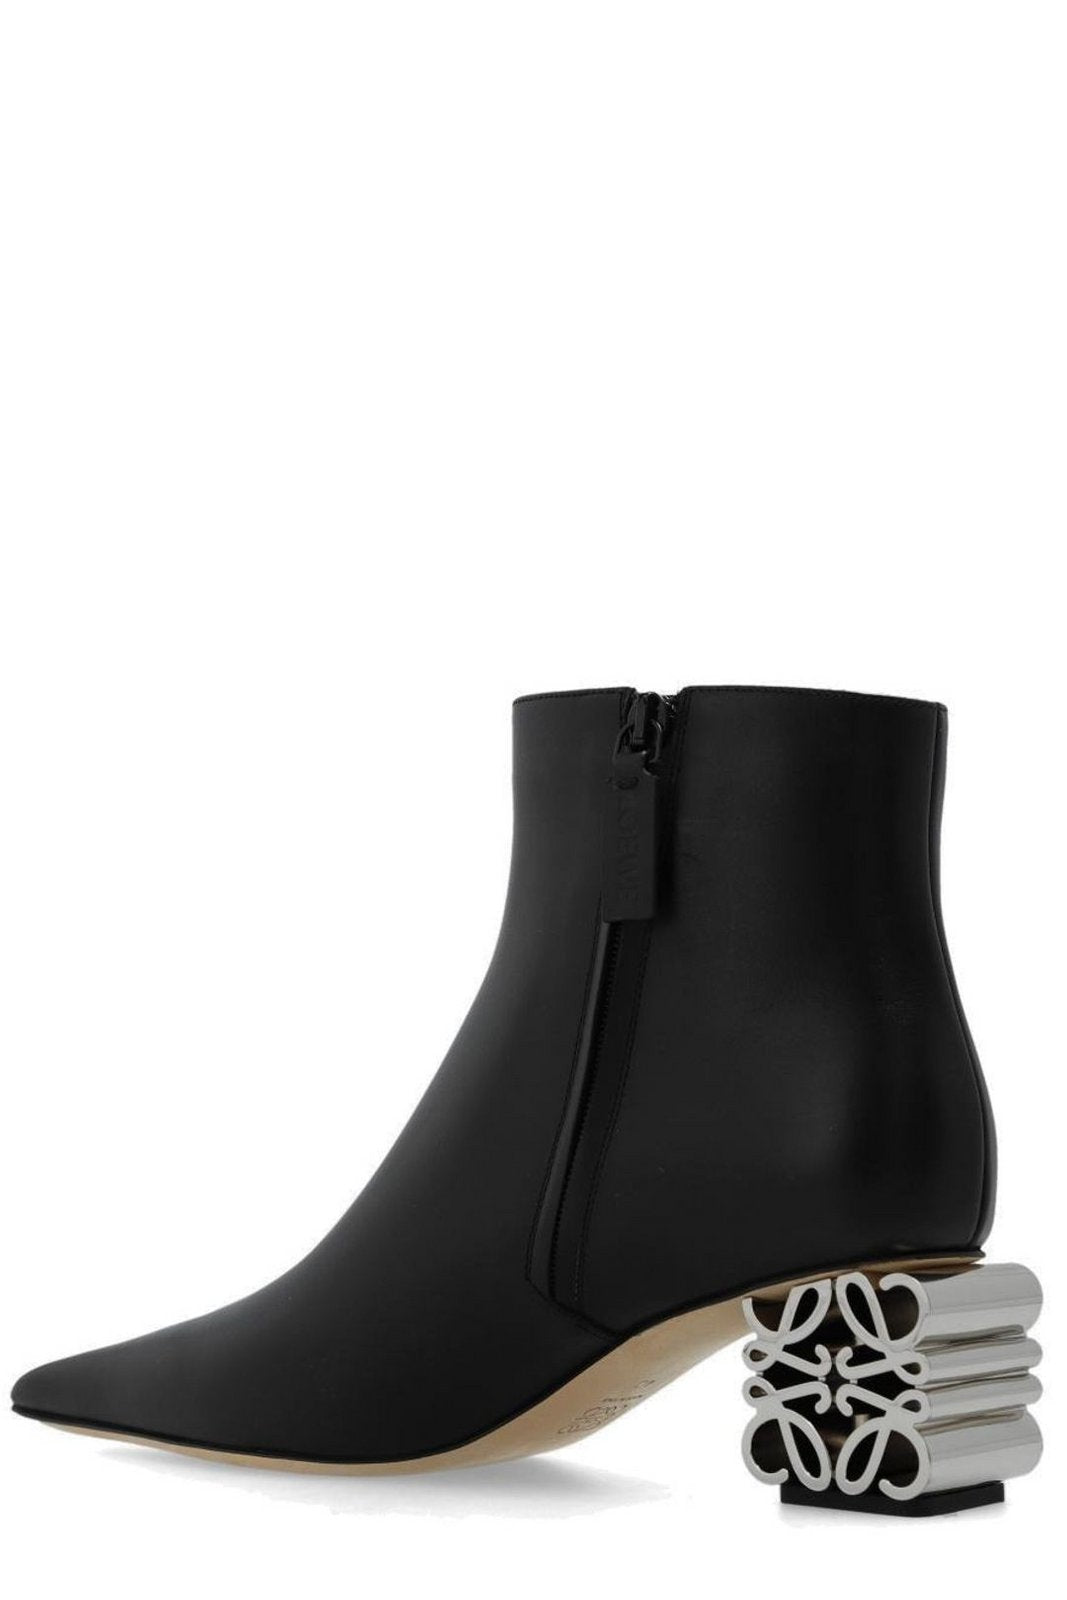 Loewe Anagram Heeled Pointed-Toe Ankle Boots